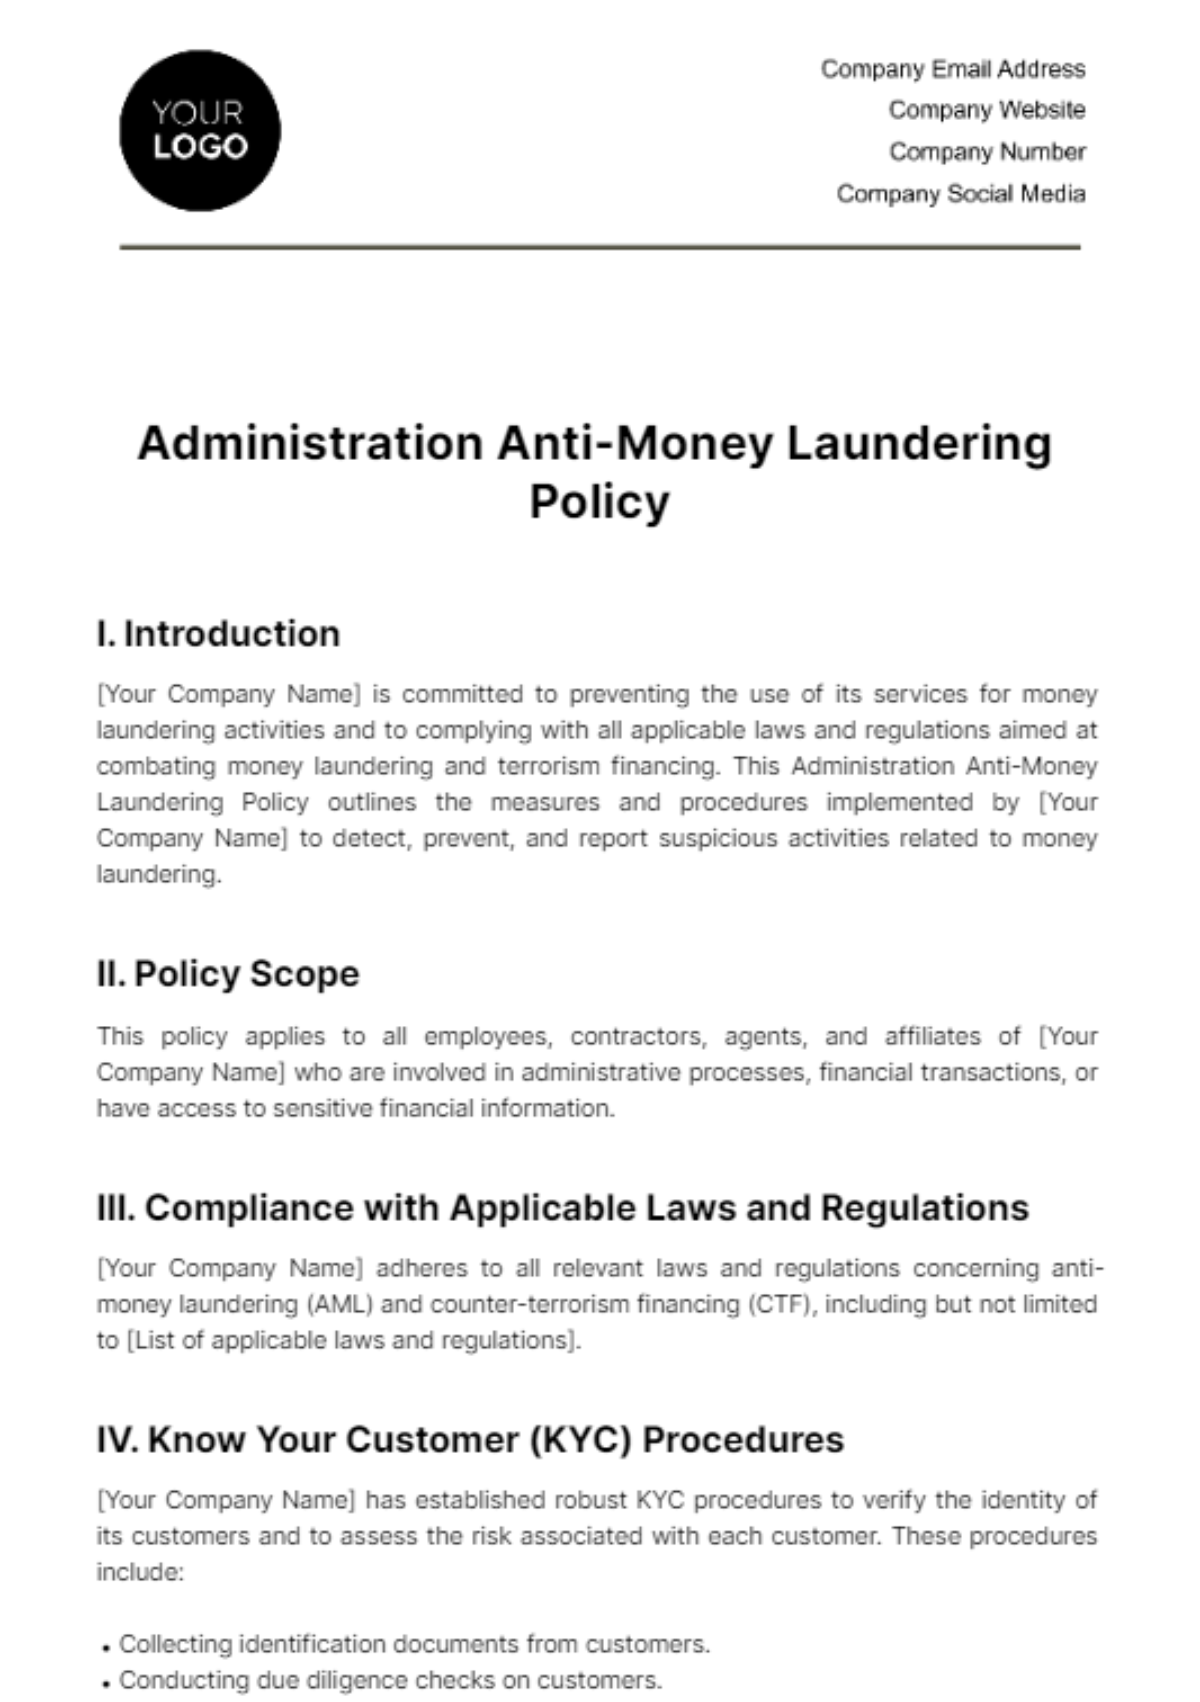 Free Administration Anti-Money Laundering Policy Template